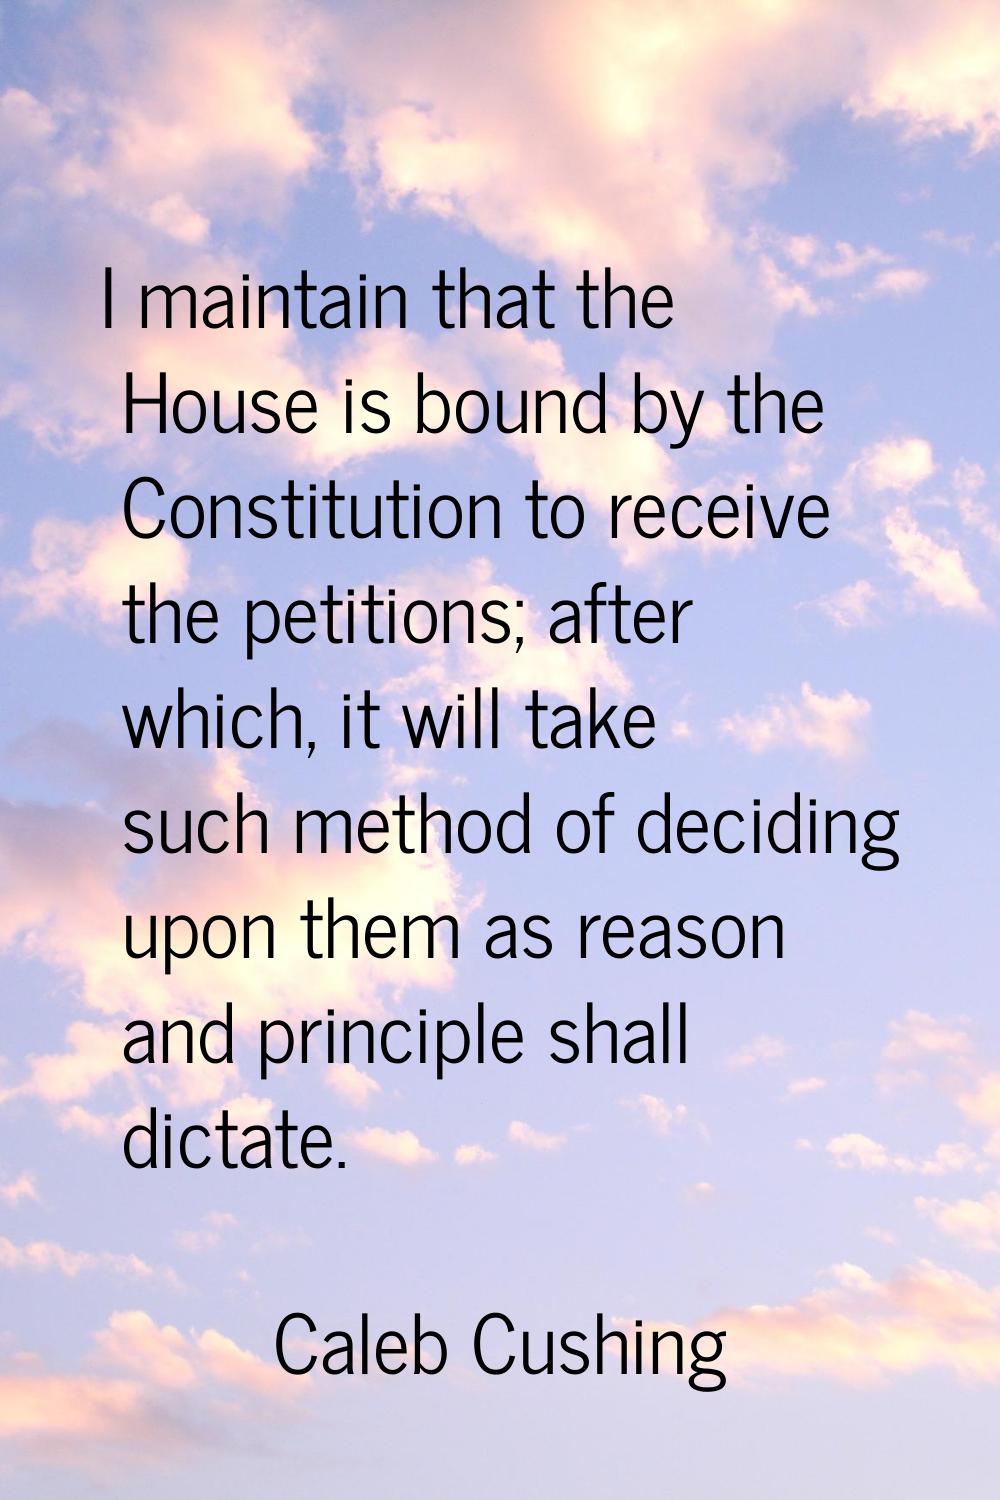 I maintain that the House is bound by the Constitution to receive the petitions; after which, it wi